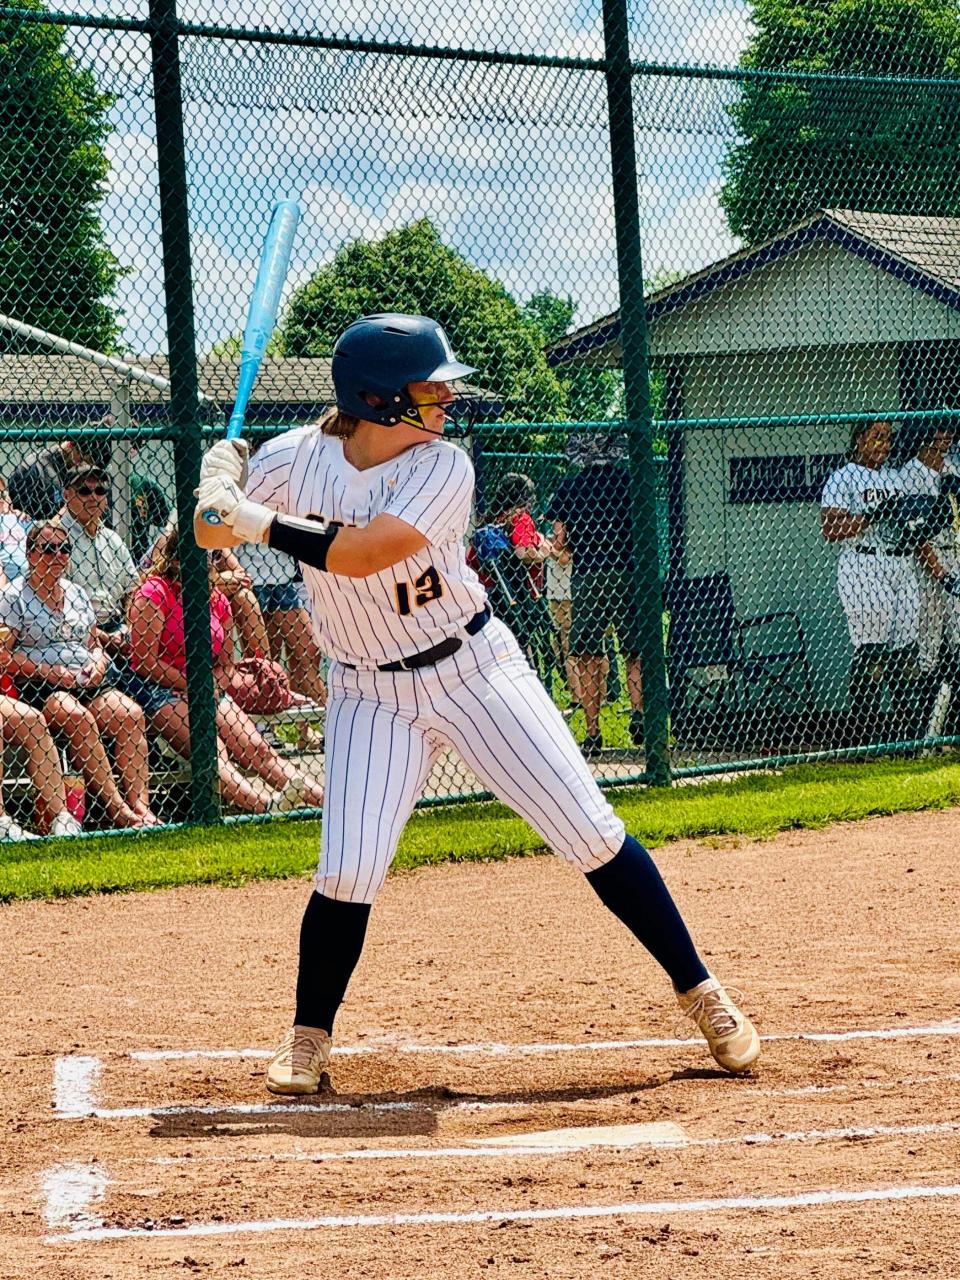 Lancaster sophomore Kendall Brown hit an RBI single to give the Lady Gales a 1-0 lead in the third inning and they would go on to win 2-0 over Olentangy Liberty in Saturday's district championship game.